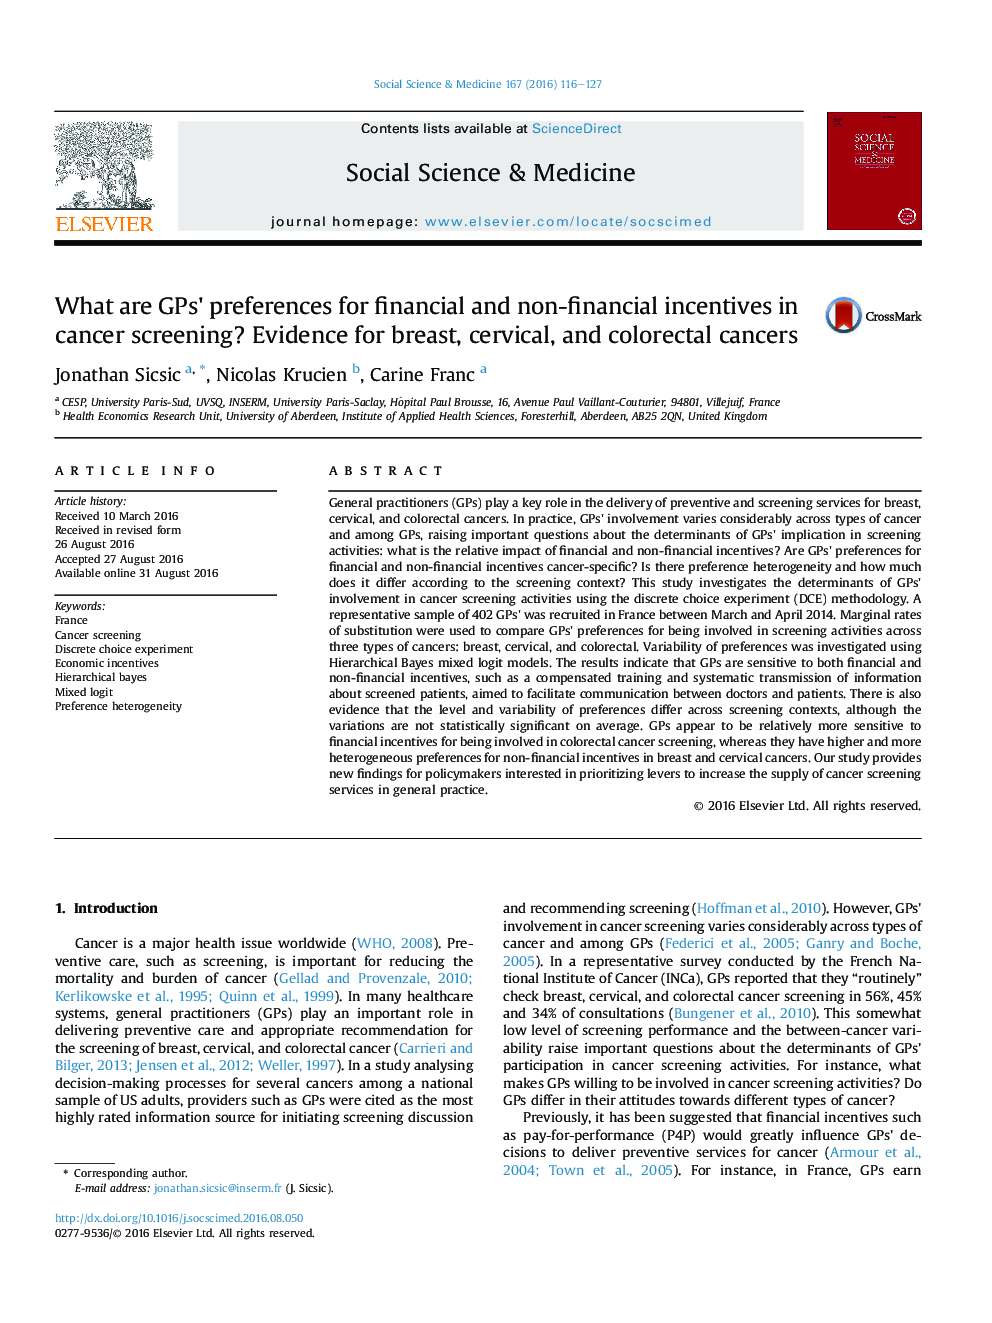 What are GPs' preferences for financial and non-financial incentives in cancer screening? Evidence for breast, cervical, and colorectal cancers